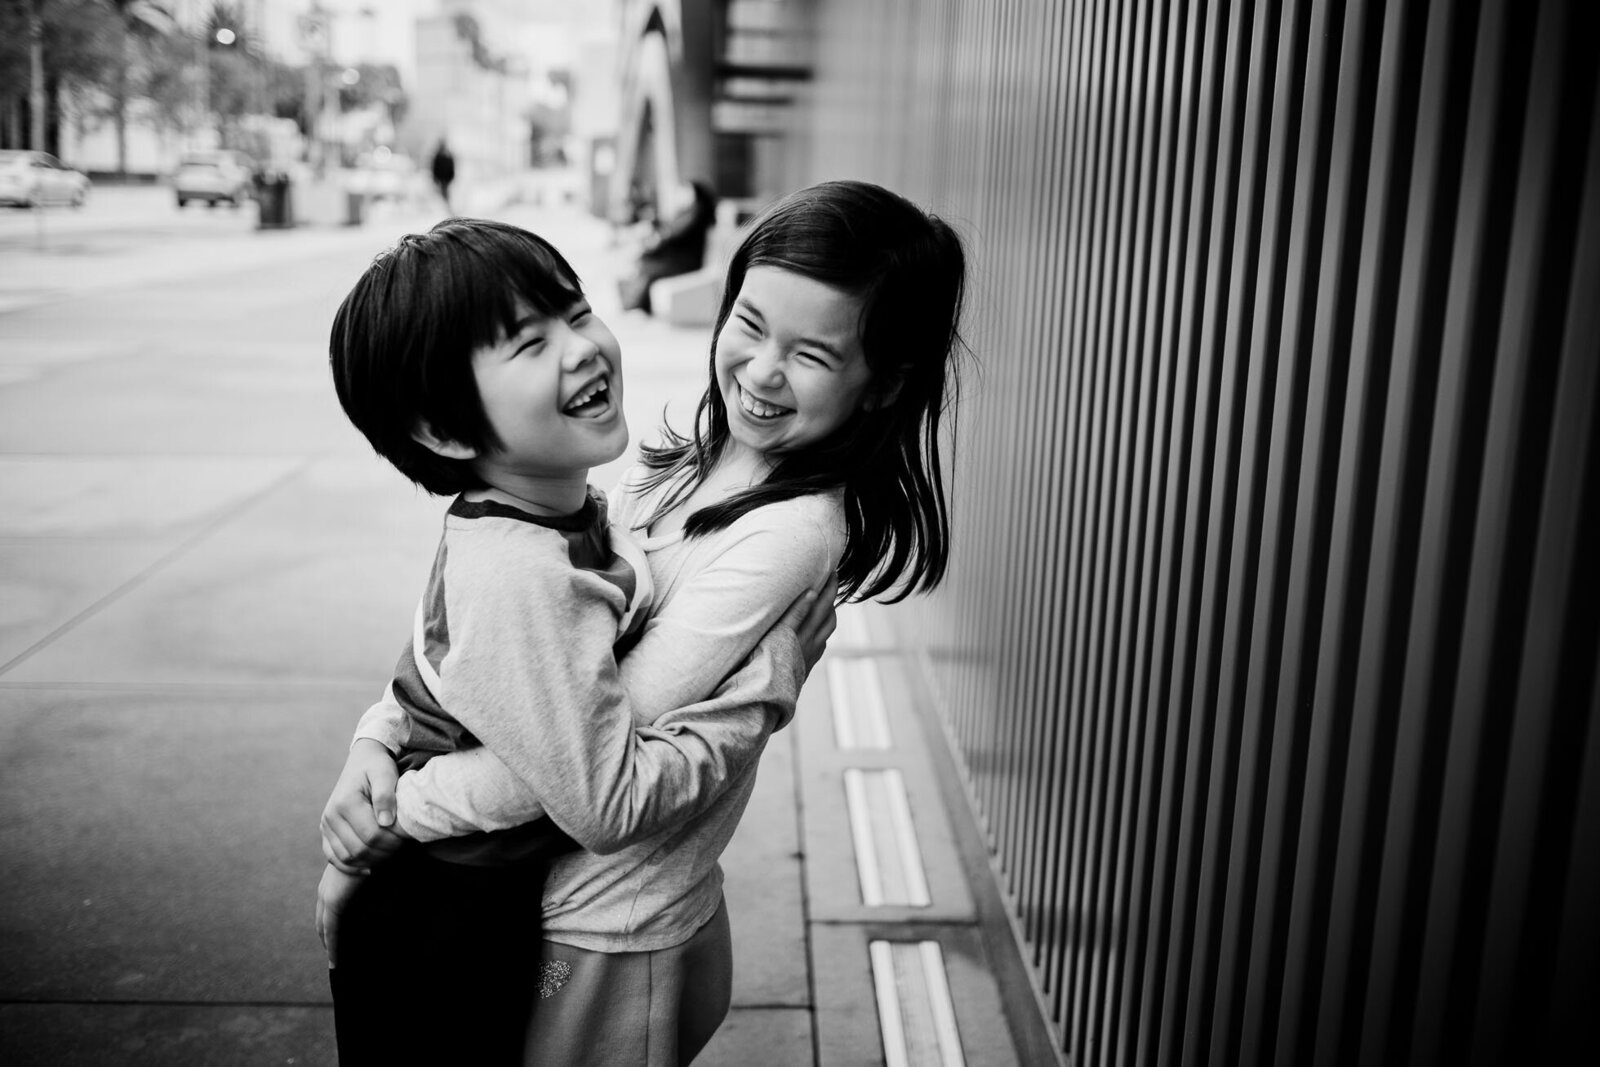 siblings hug each other playfully in a black & white image